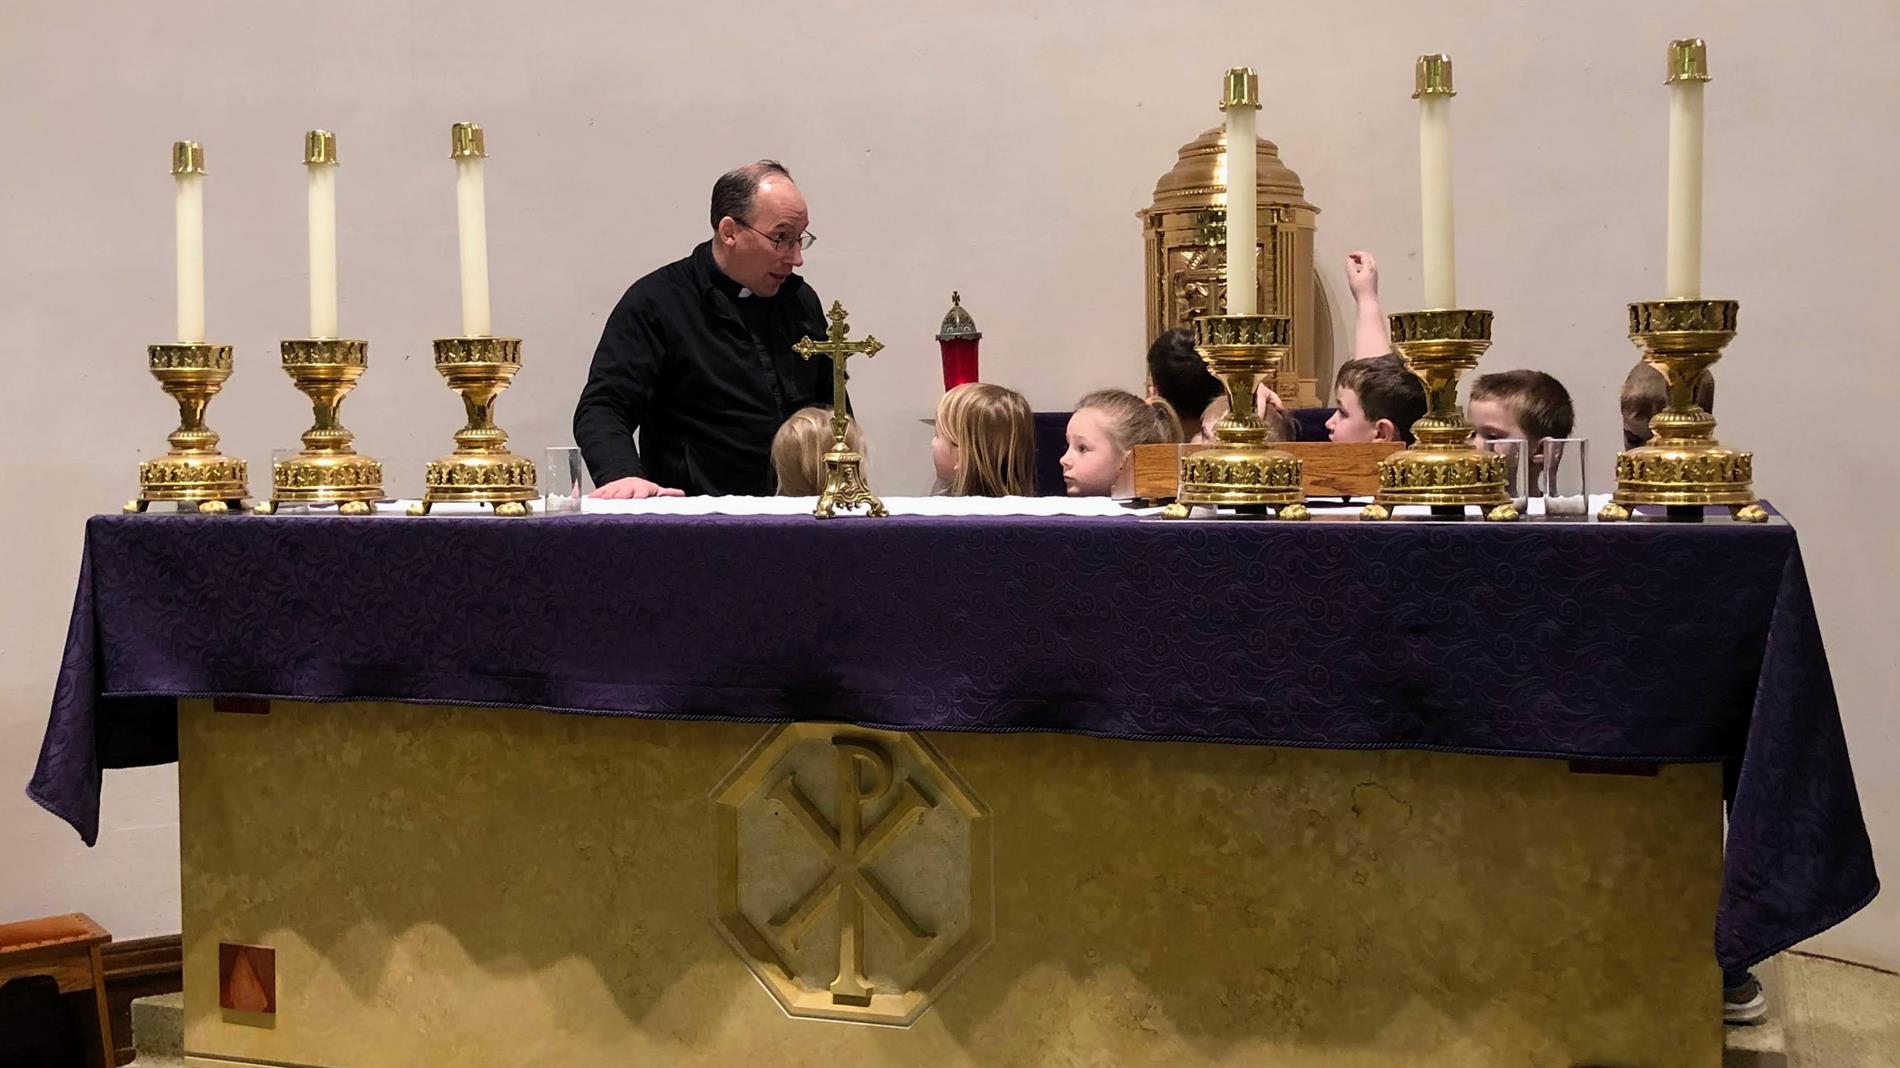 Priest at the altar showing students the tabernacle.